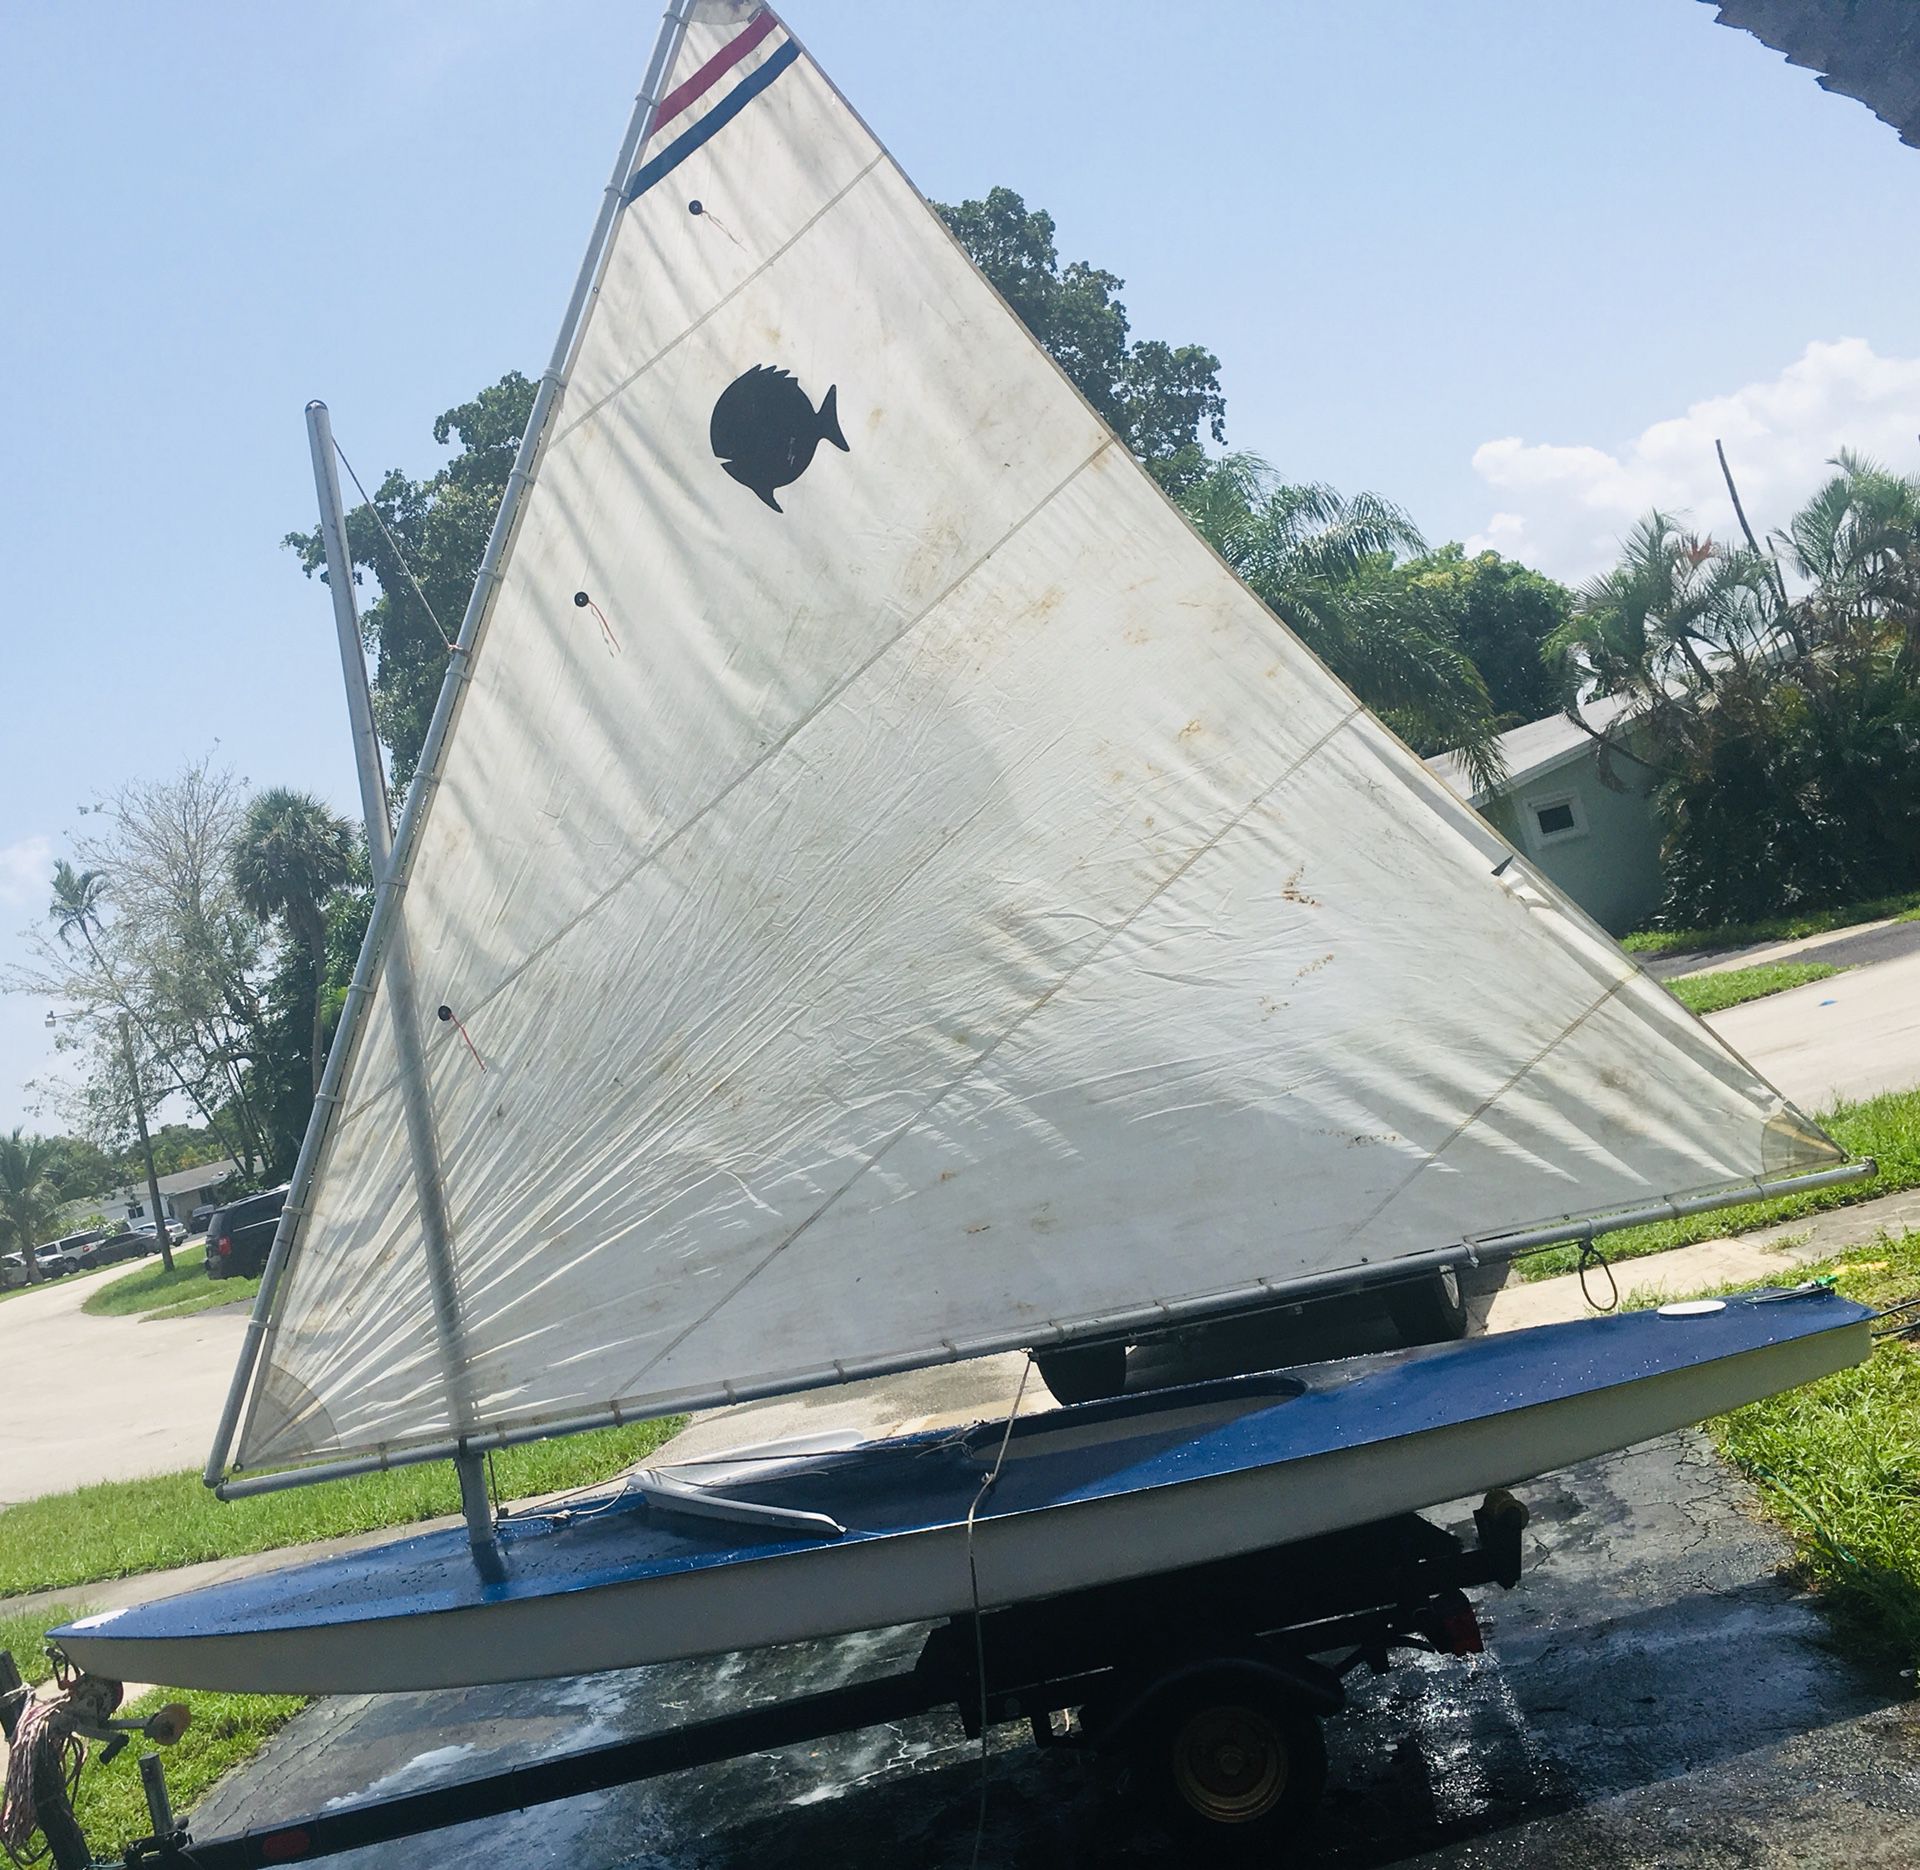 Sunfish sailboat. Includes trailer. Ready to sail